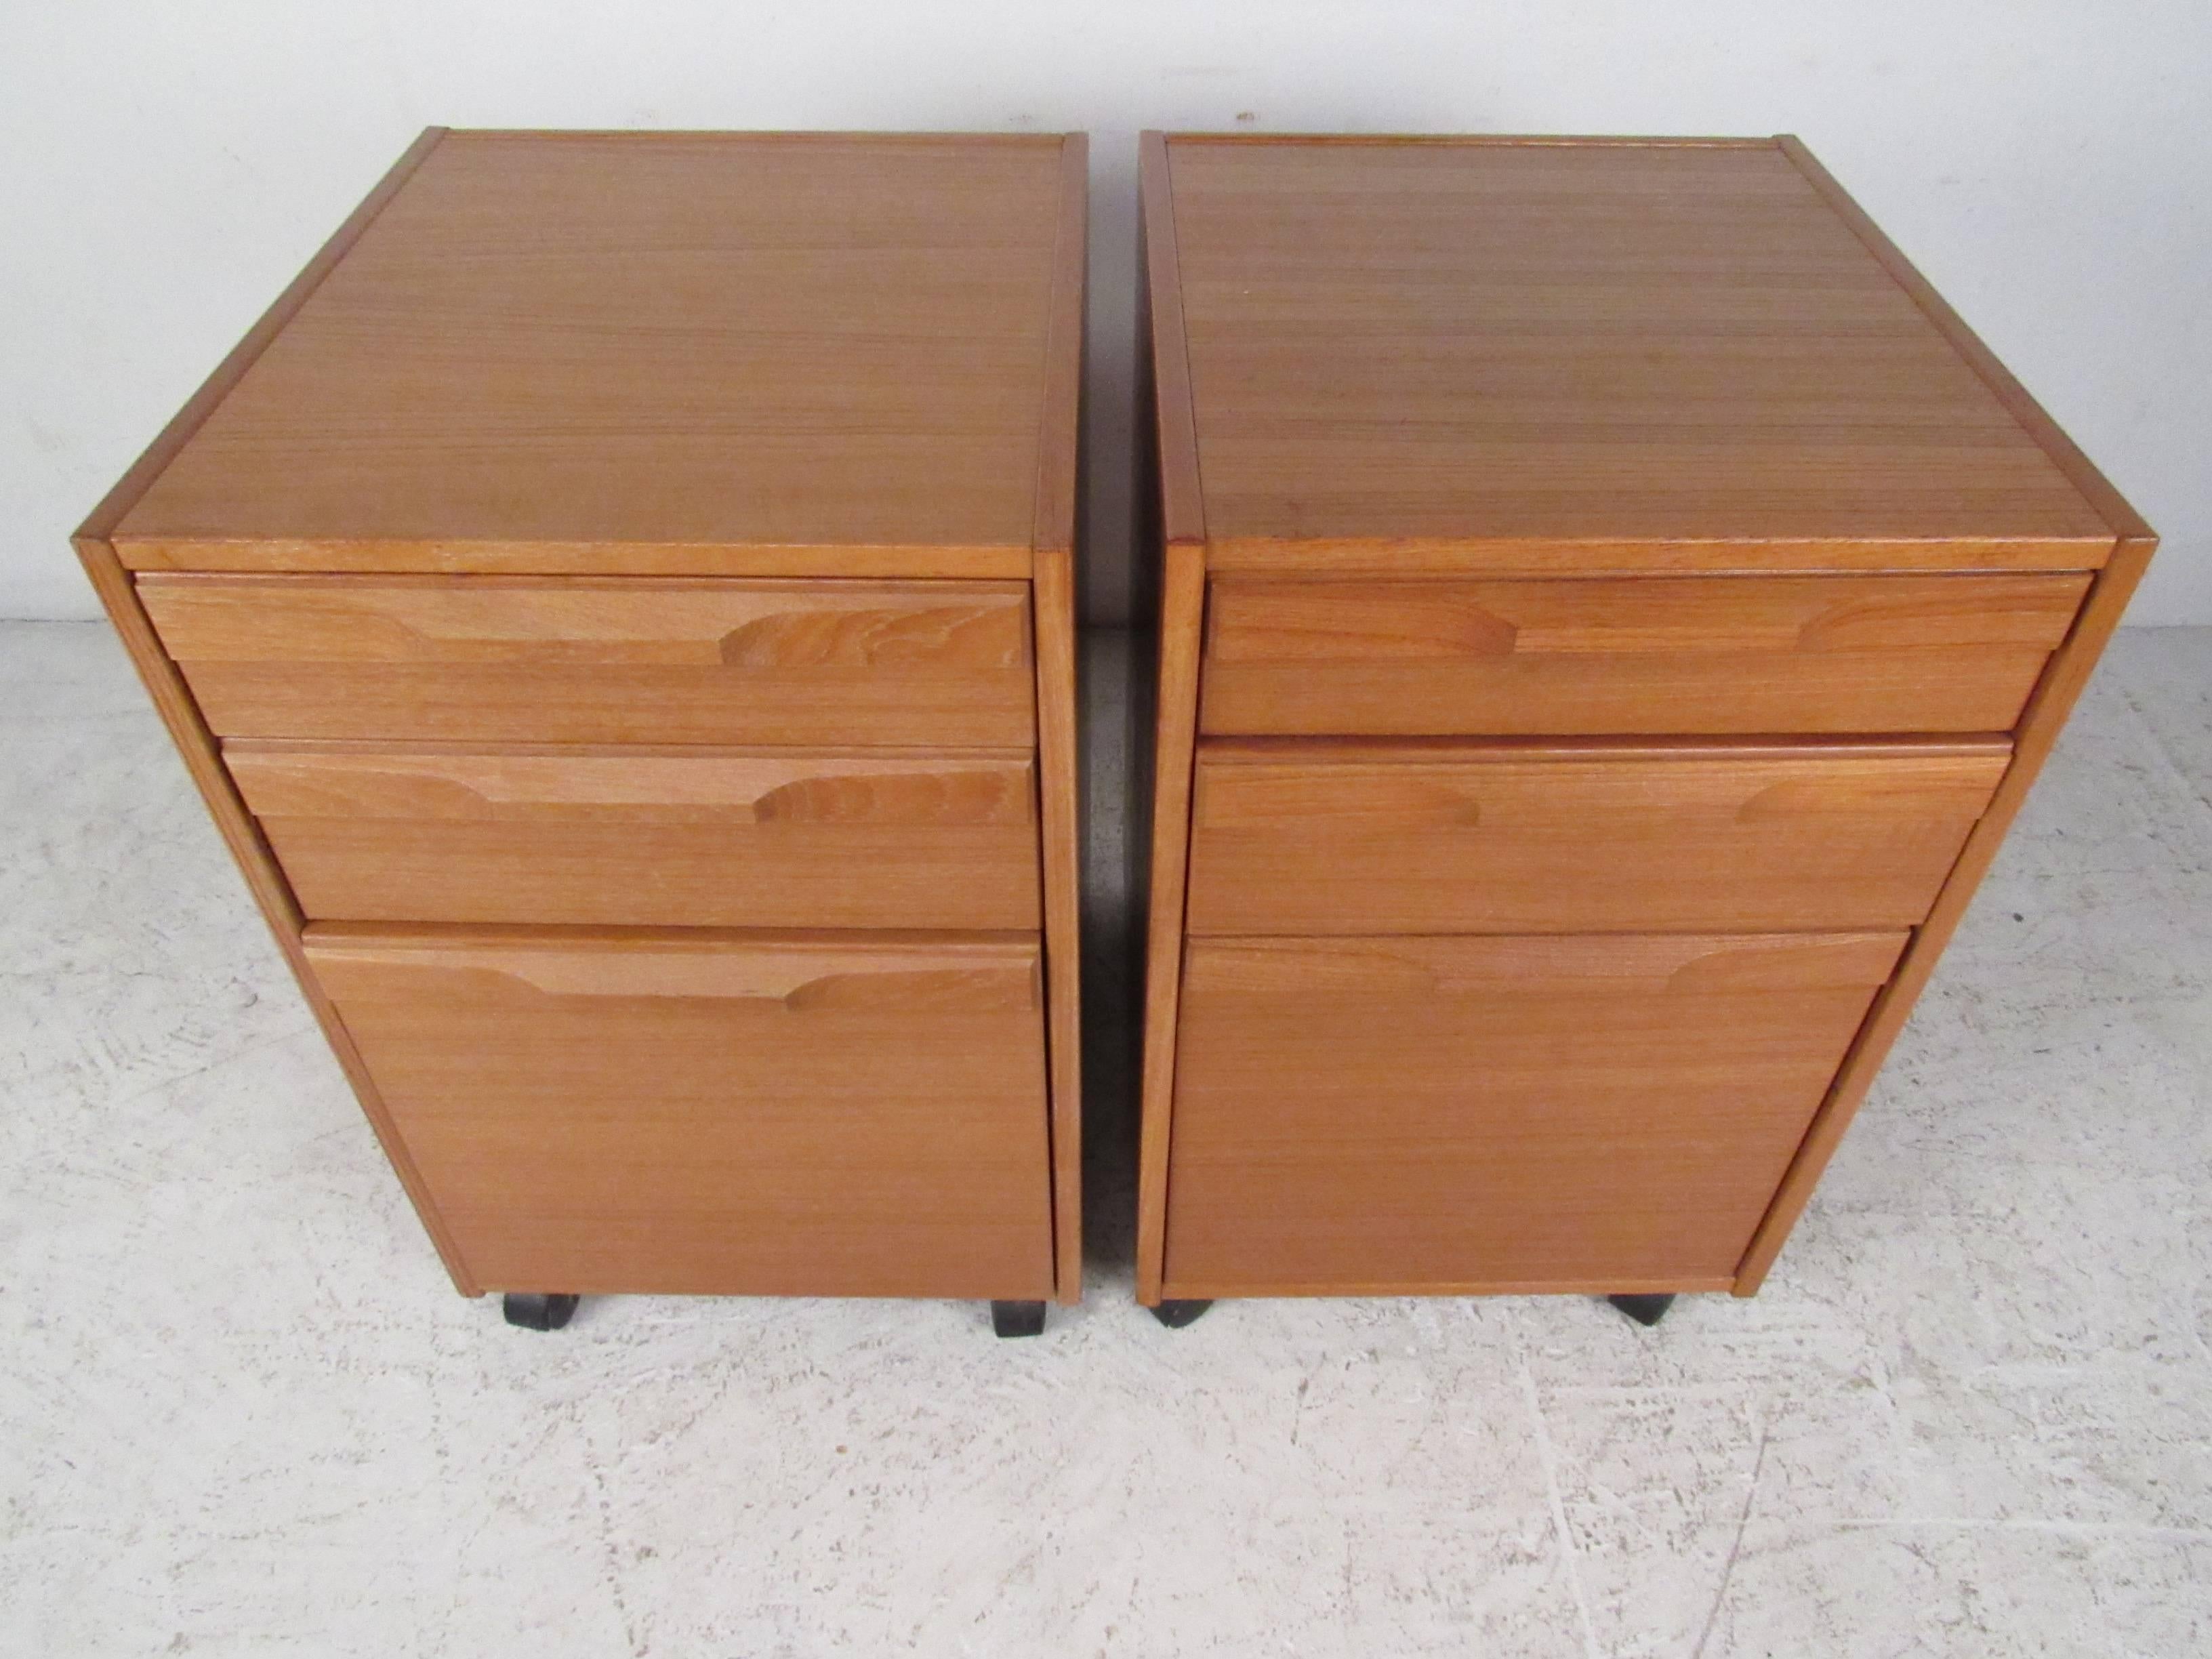 This pair of three drawer teak finish filing cabinets feature carved drawer handles, casters for easy mobility and unique Mid-Century design. Manufactured in Denmark by Denka, please confirm item location (NY or NJ).